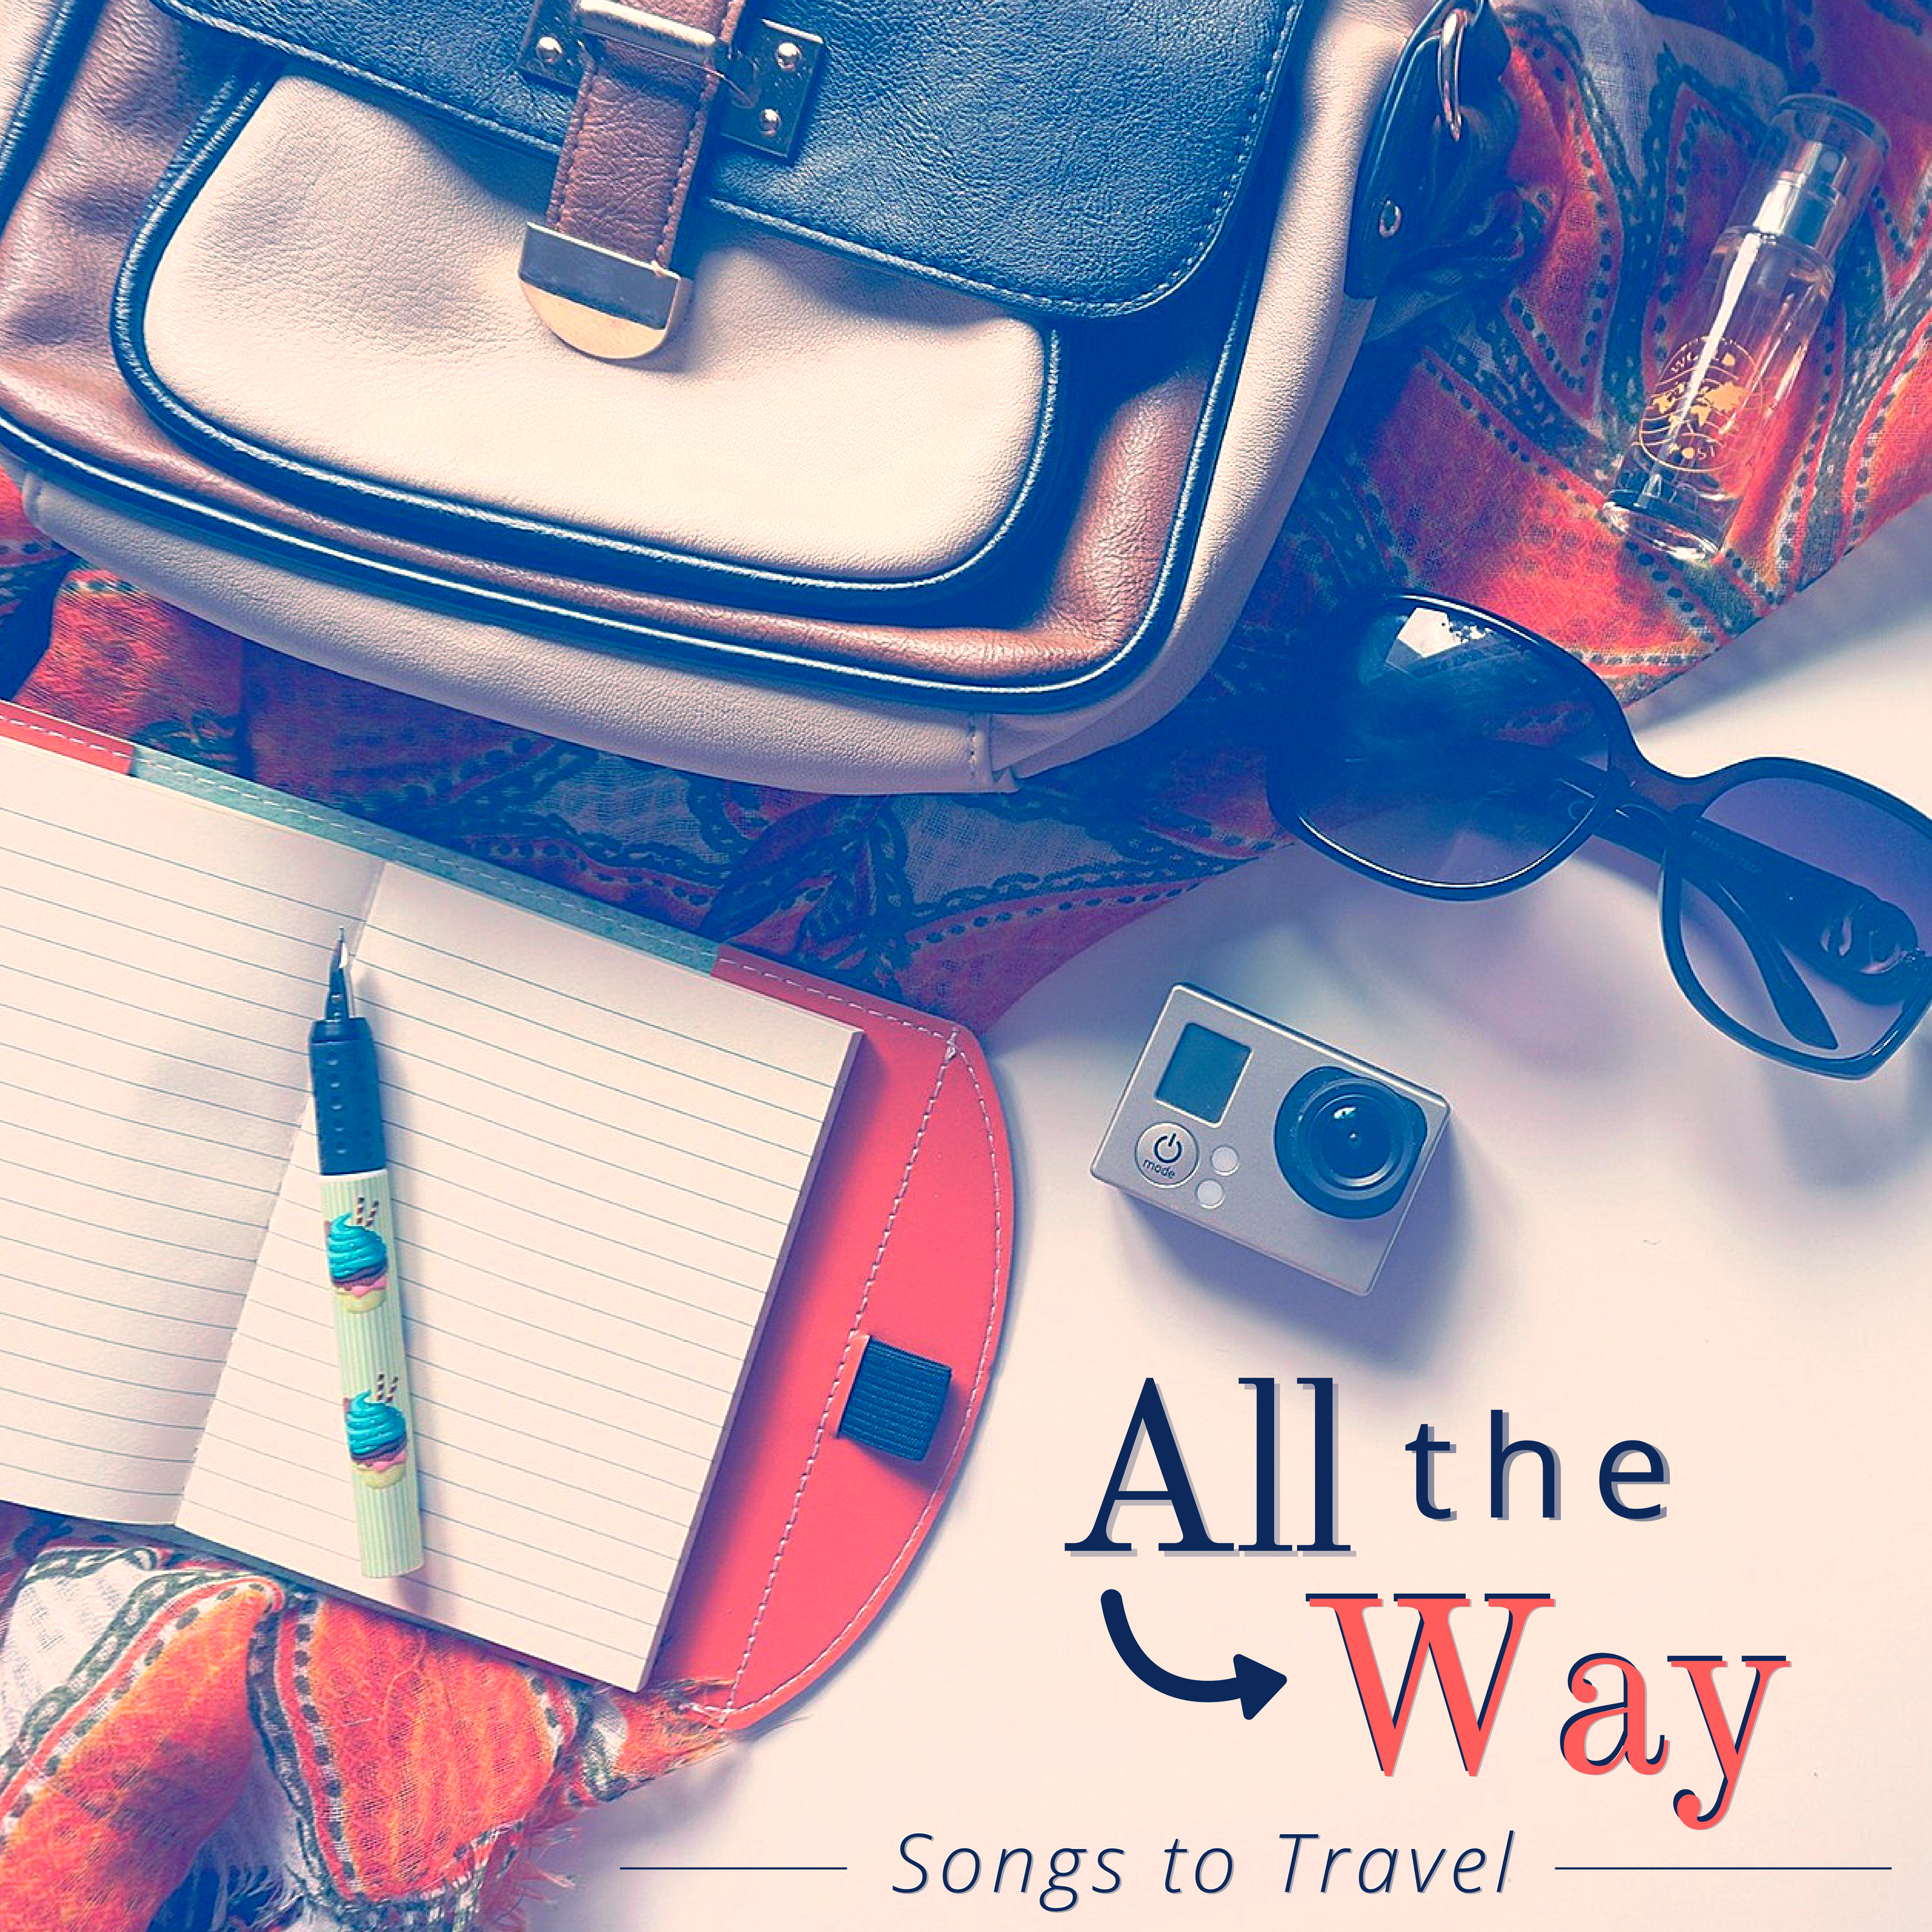 All the Way - Songs to Travel